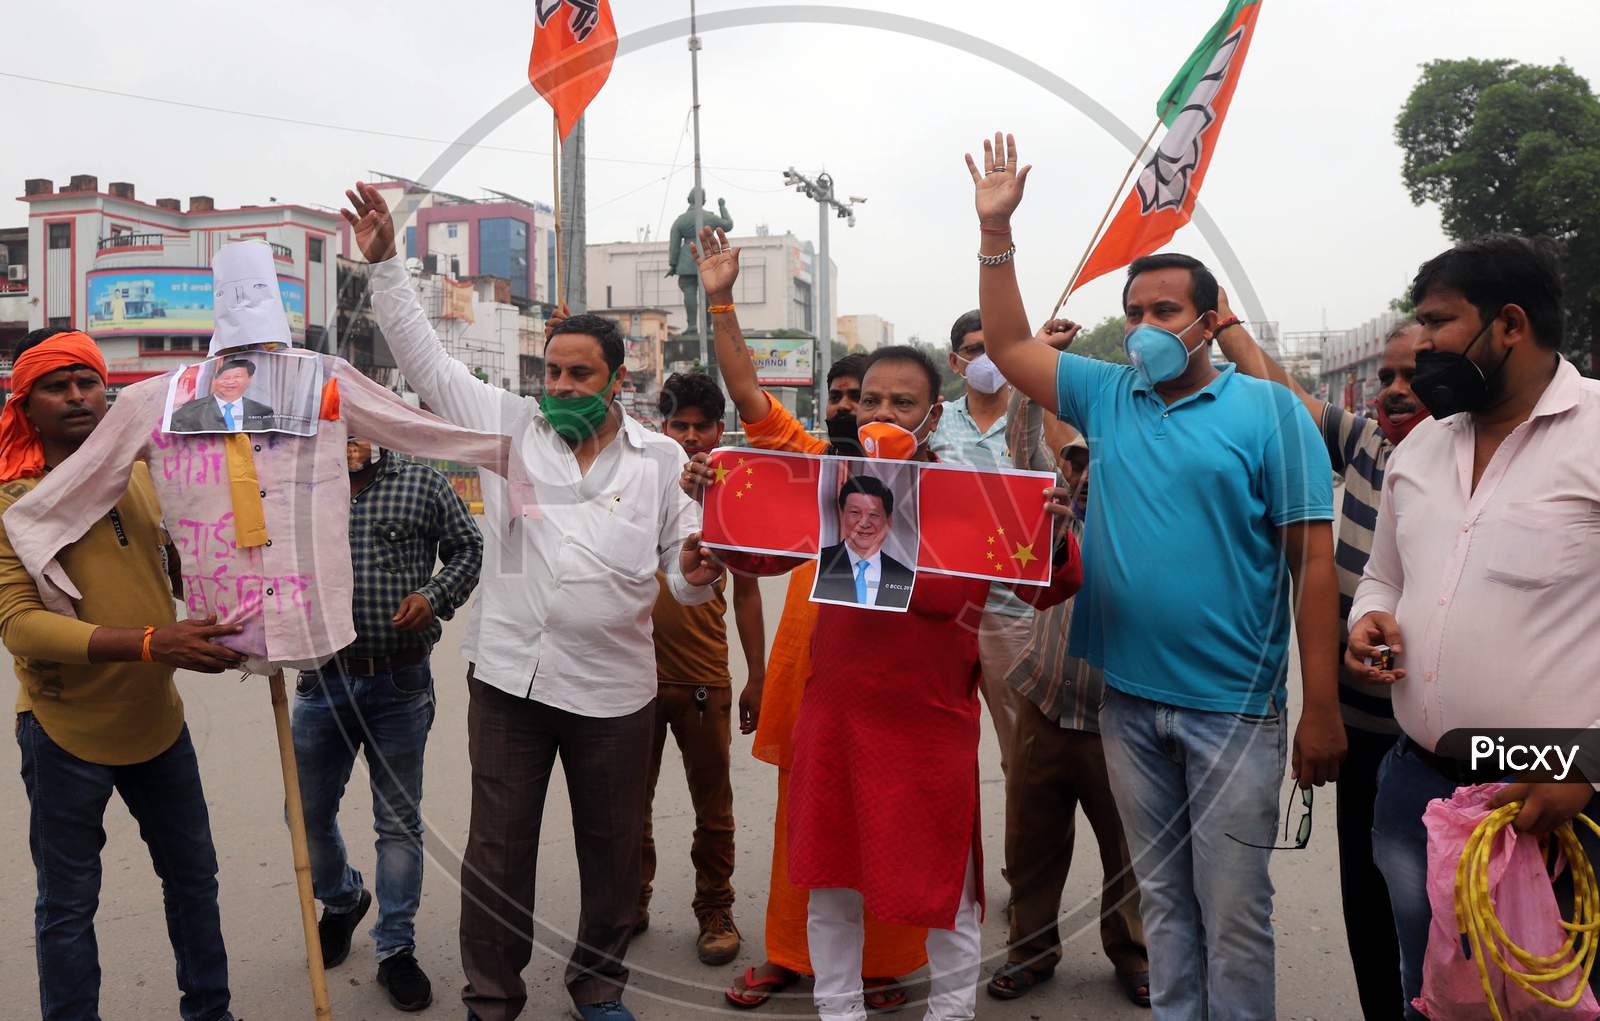 Supporters Of Bharatiya Jayanta Party (Bjp) Burn Posters and Effigy Of Chinese President Xi Jinping During A Protest Against China after a violent face-off between Indian Army and Chinese PLA , In Prayagraj, June 17, 2020.